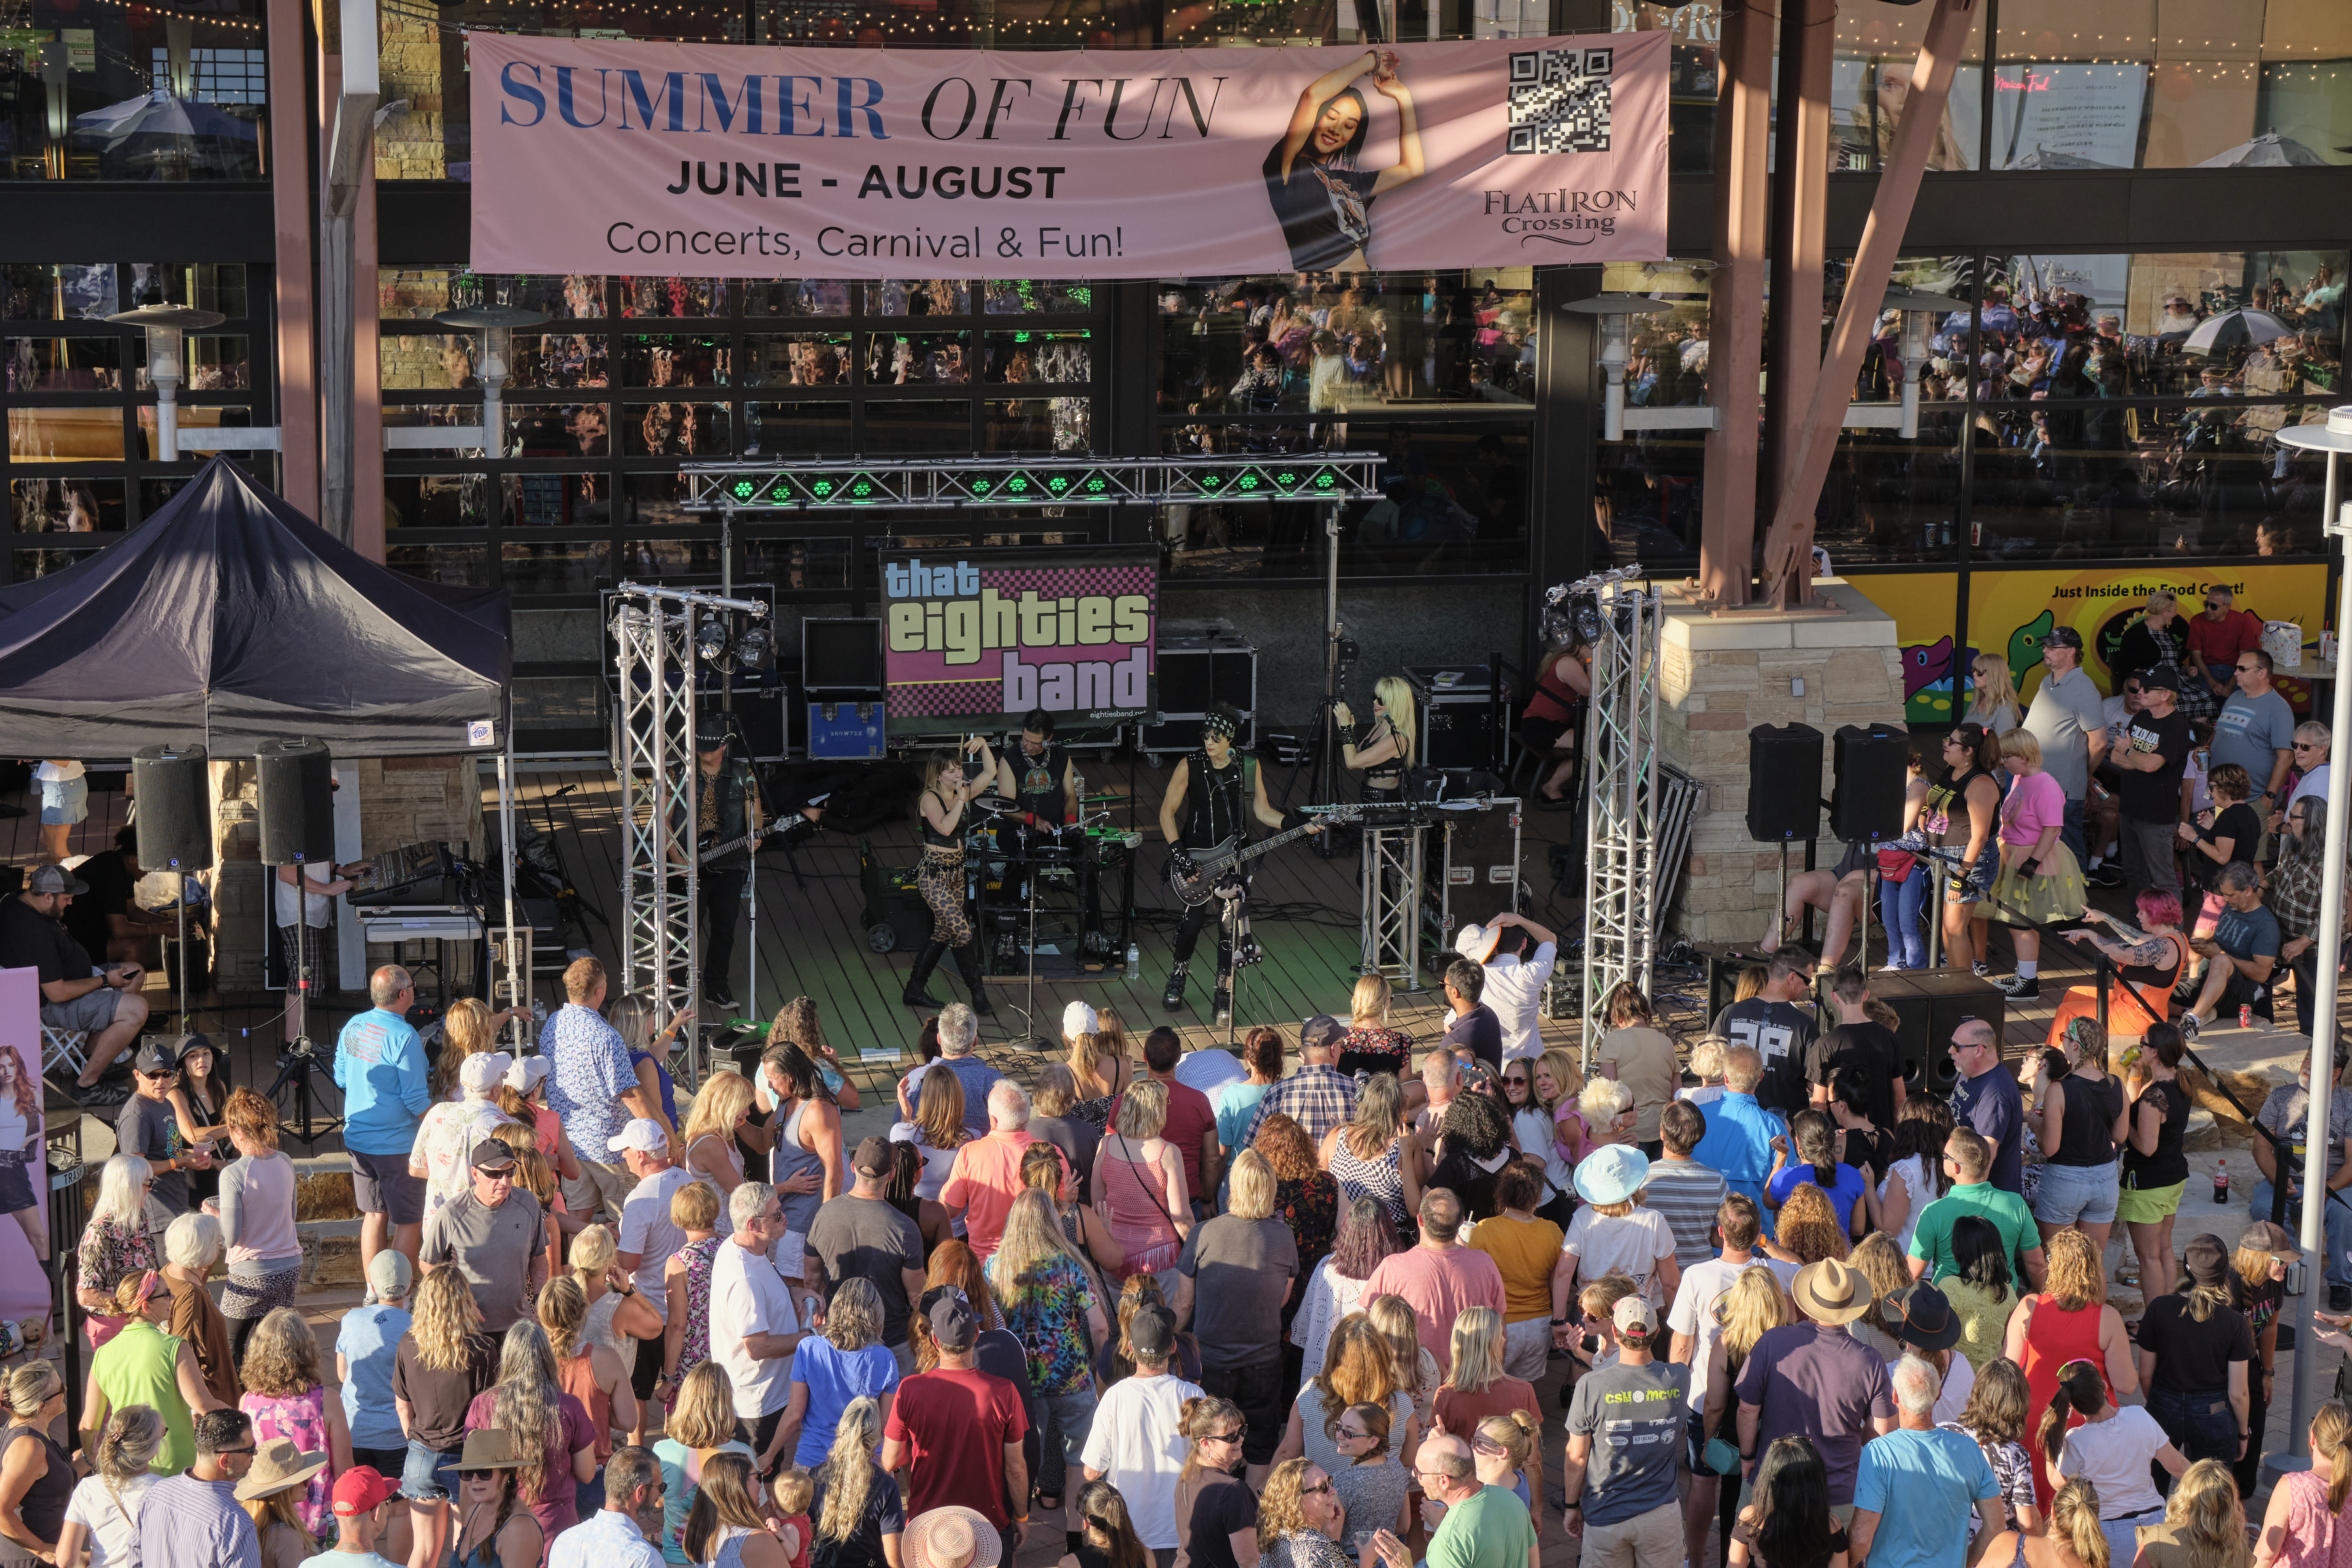 Concert crowd and band performing on stage. Text reads "Summer of Fun. June-August. Concerts, Carnival & Fun!"